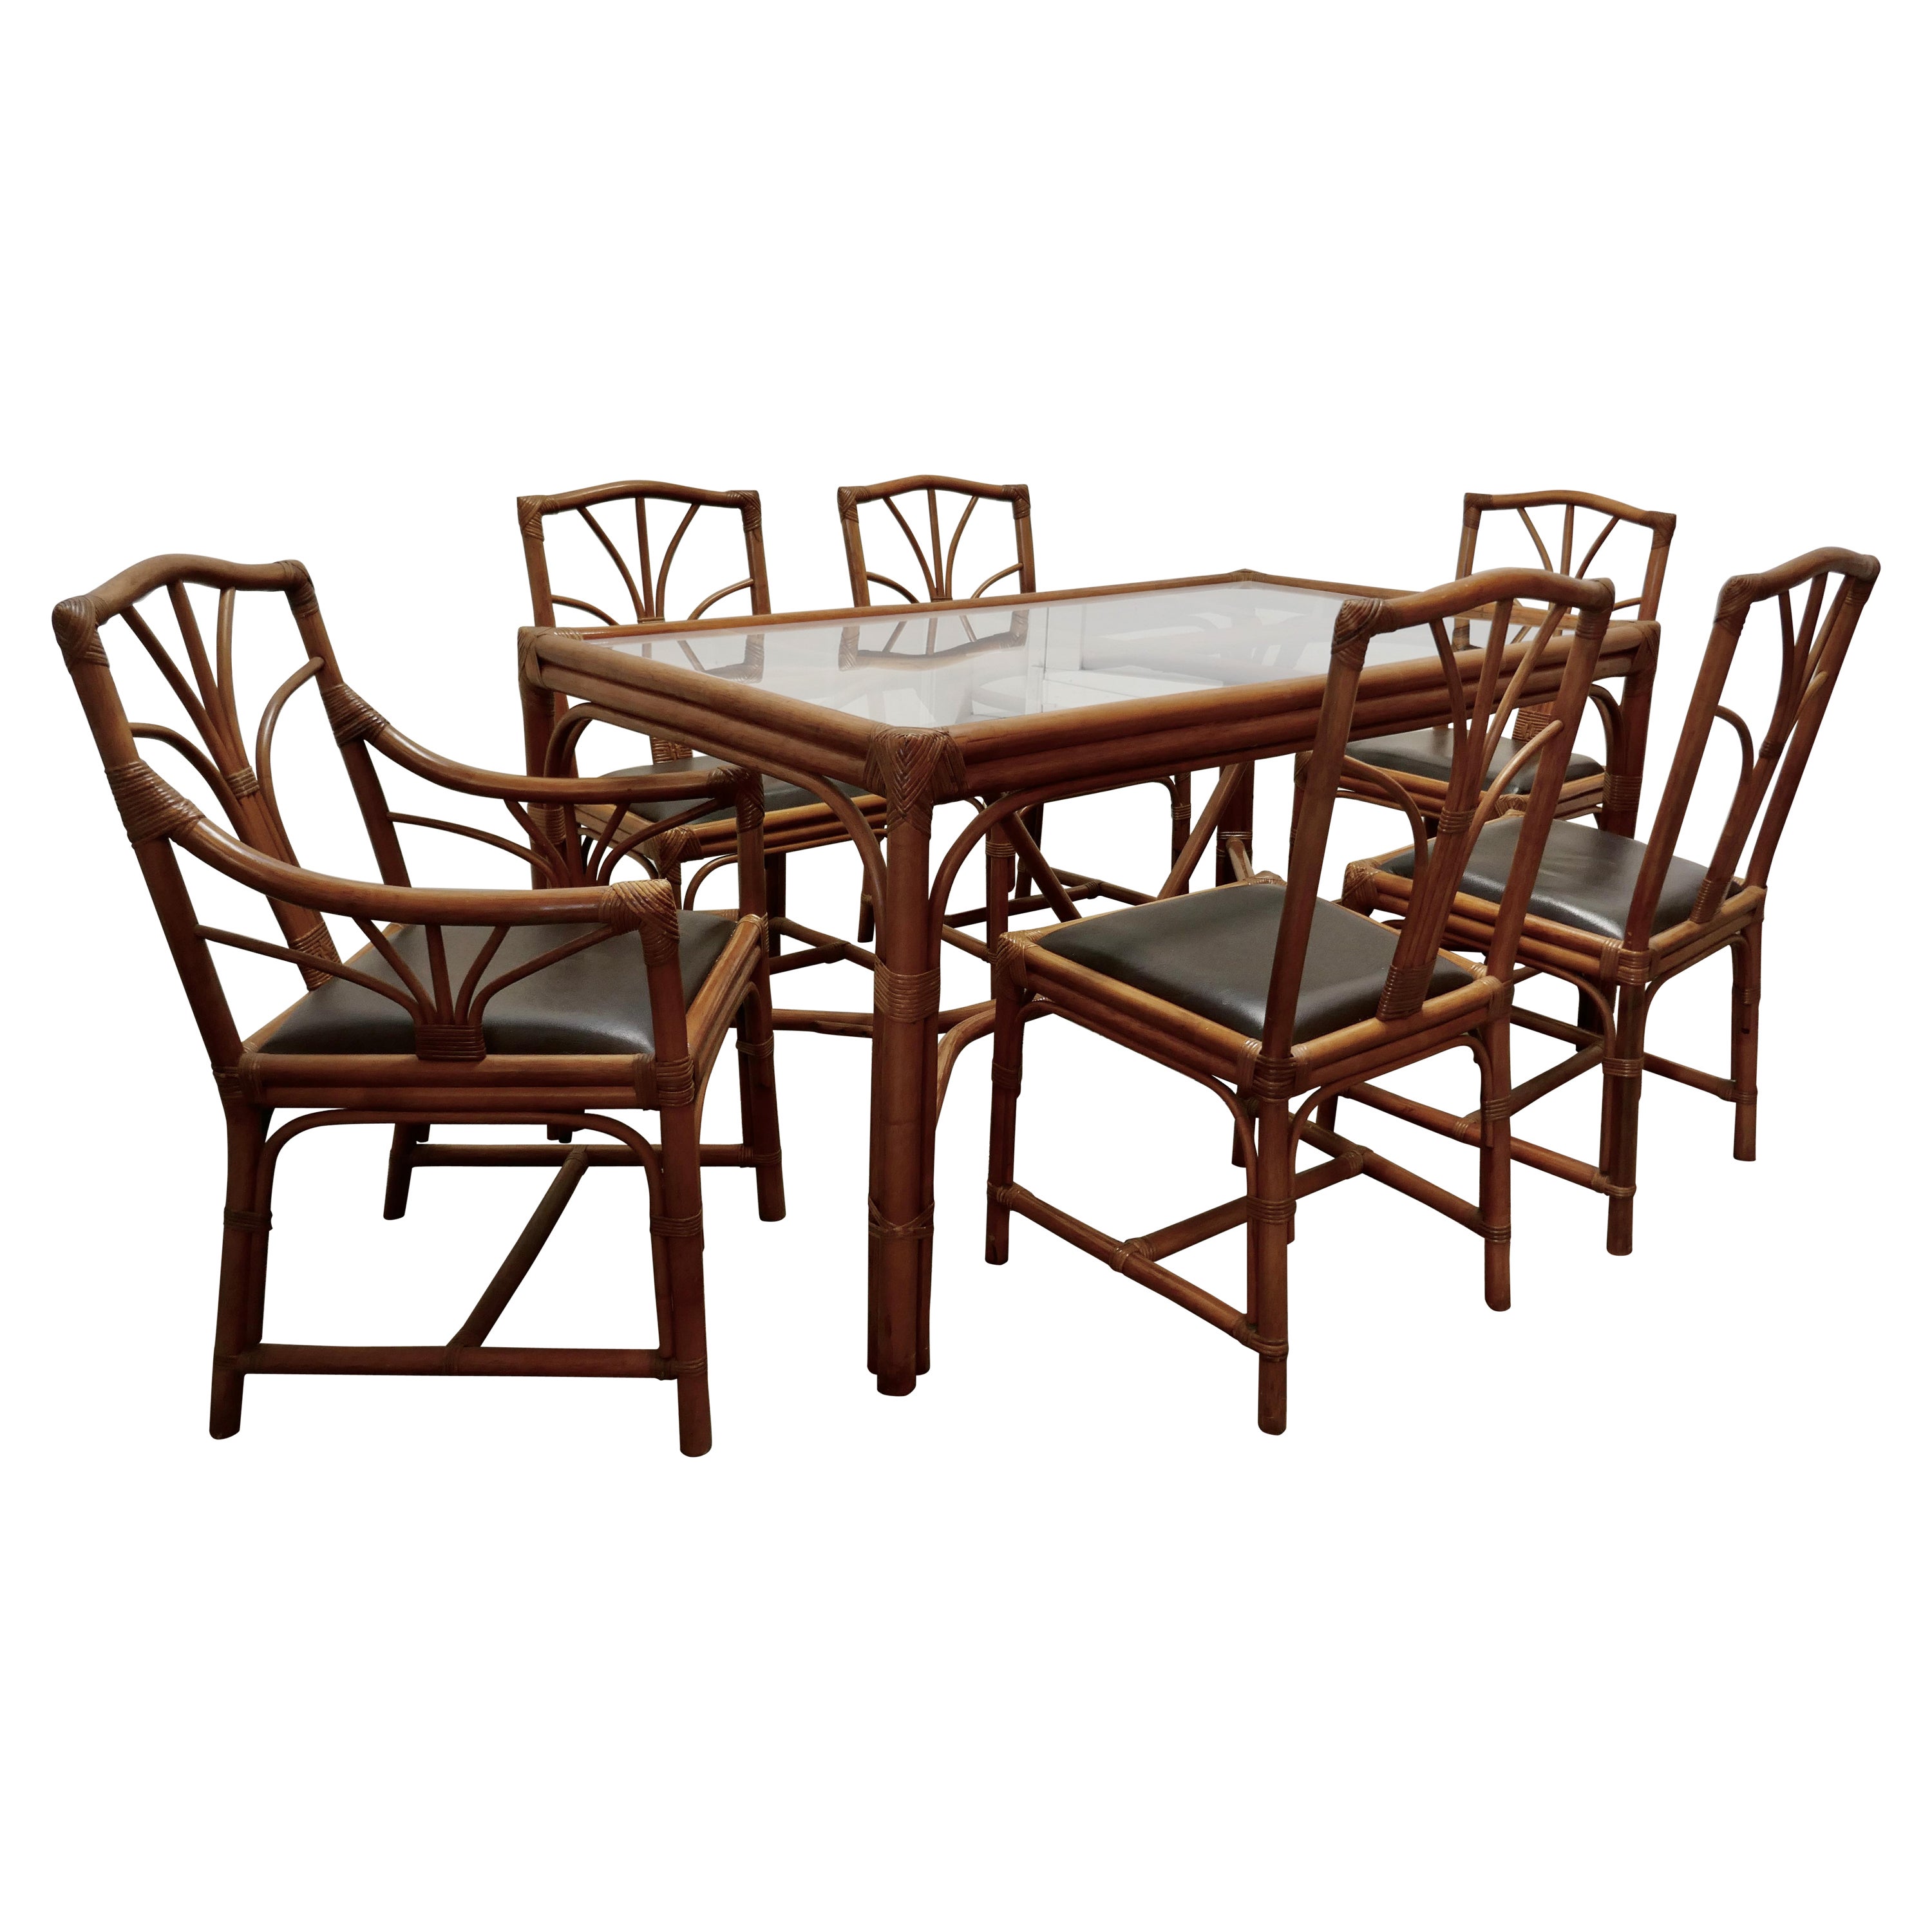 Regency Style Simulated Bamboo Conservatory Table and 6 Chairs